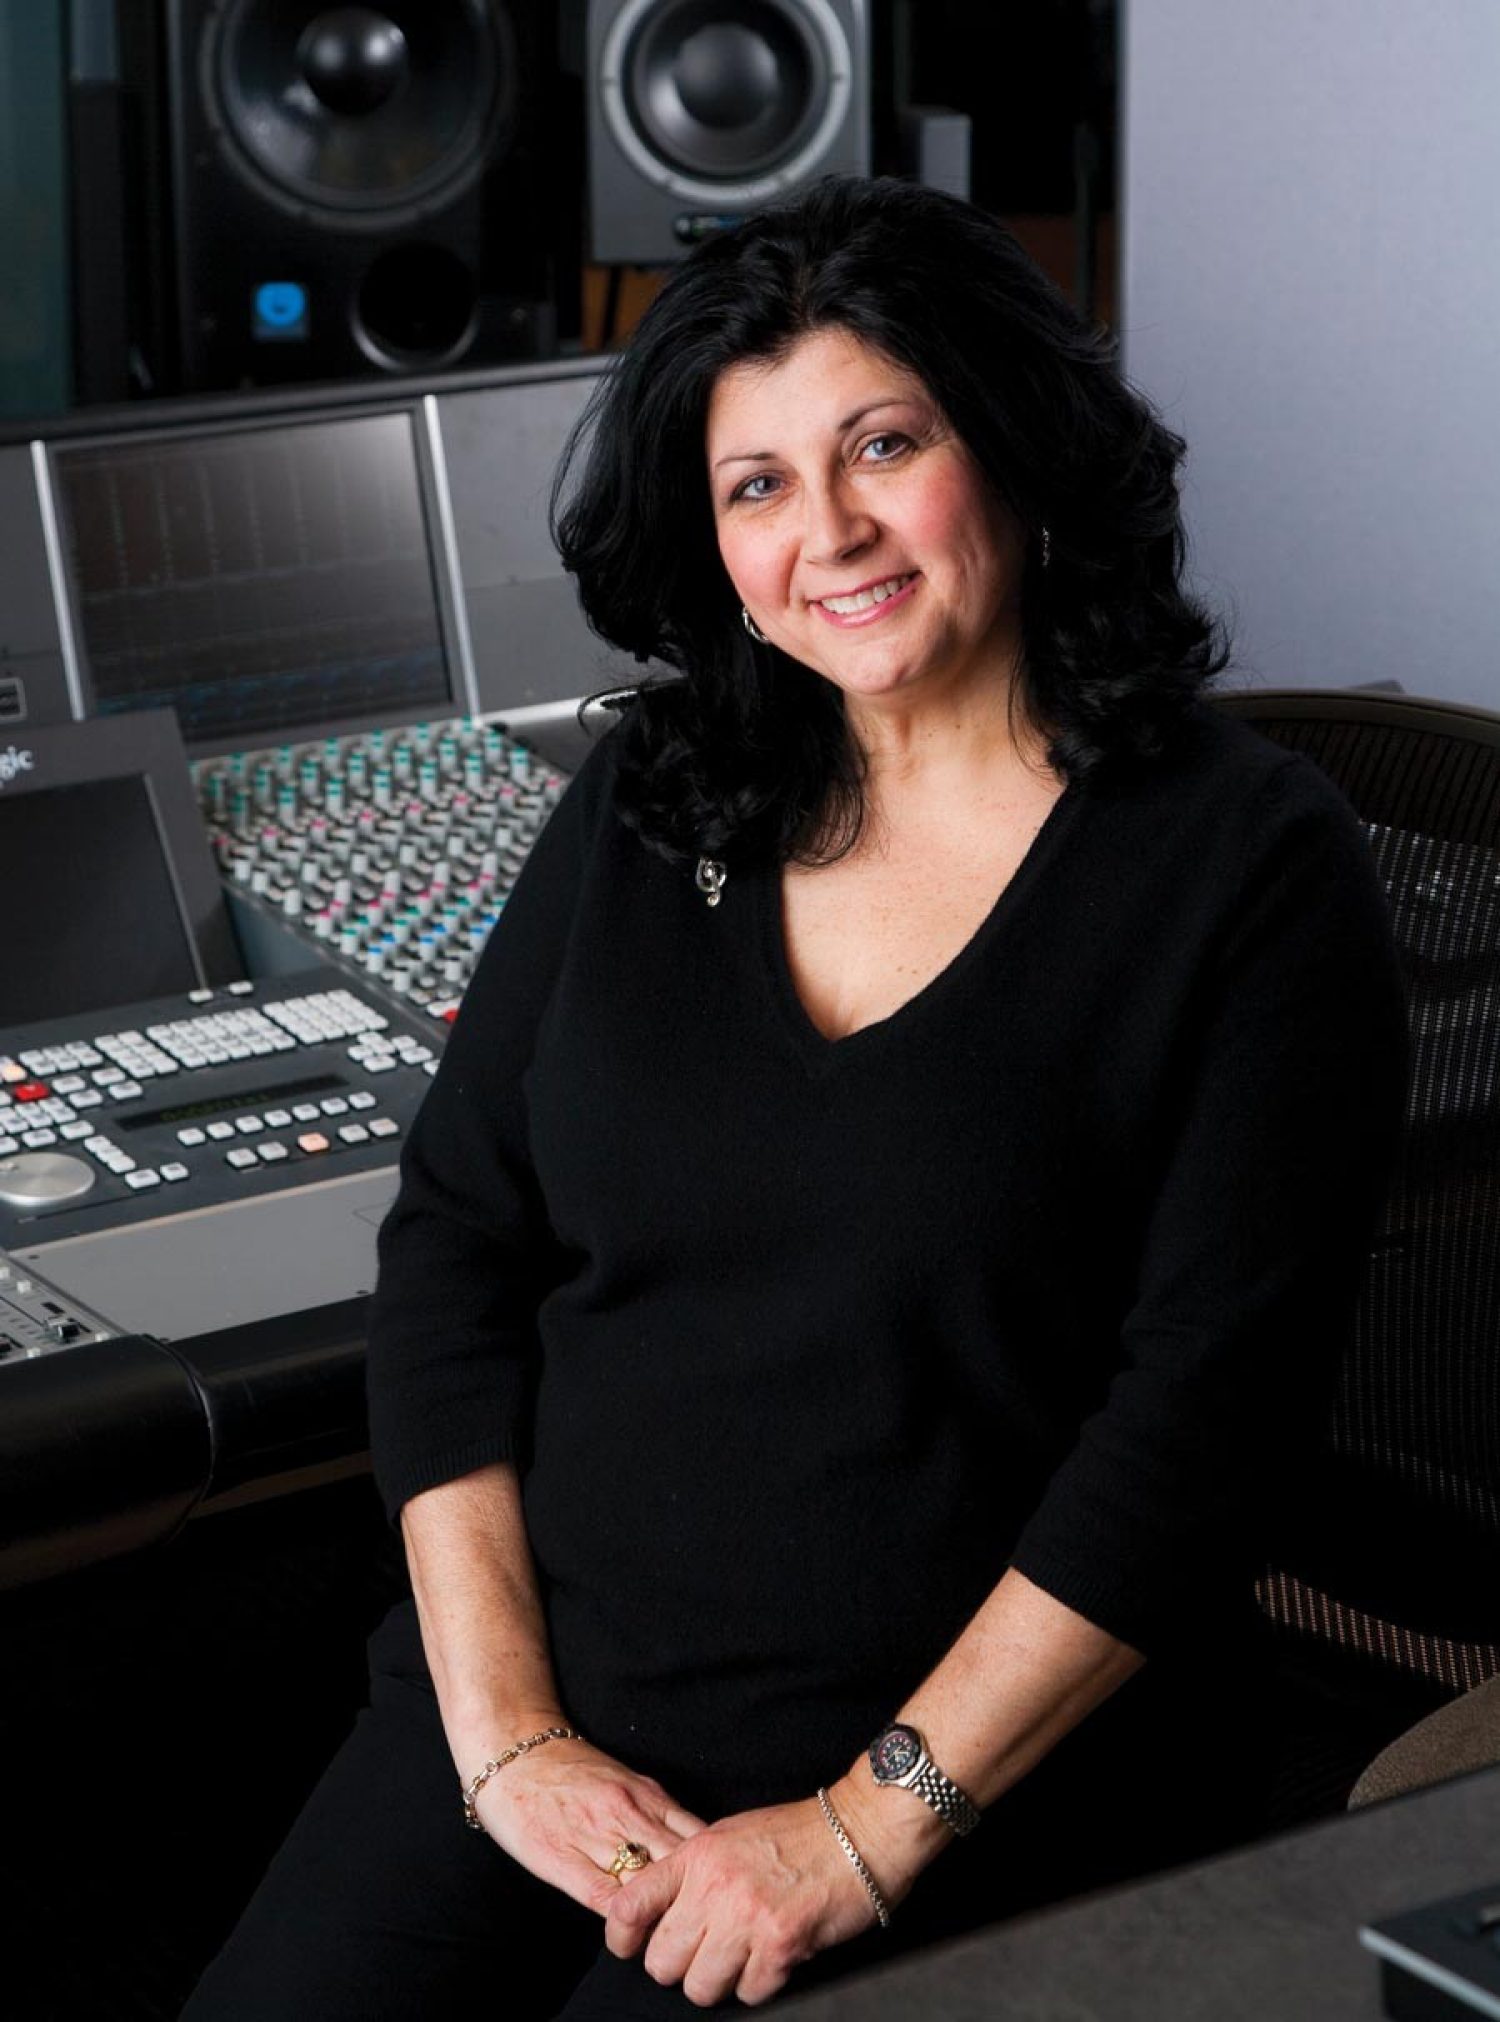 Laura Carlo photographed in a sound production booth